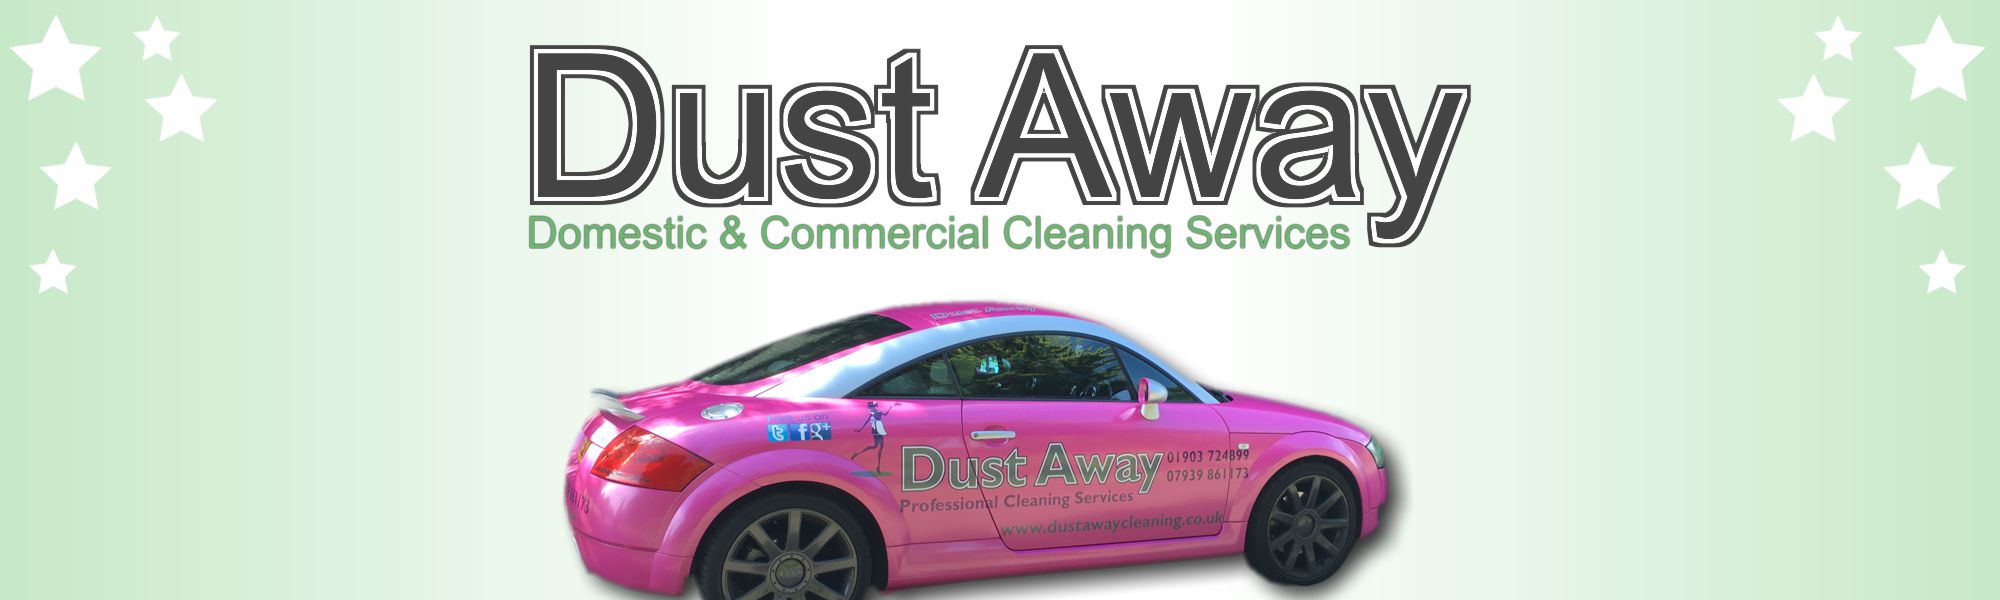 Dust Away | Domestic & Commercial Cleaning Services | Littlehampton